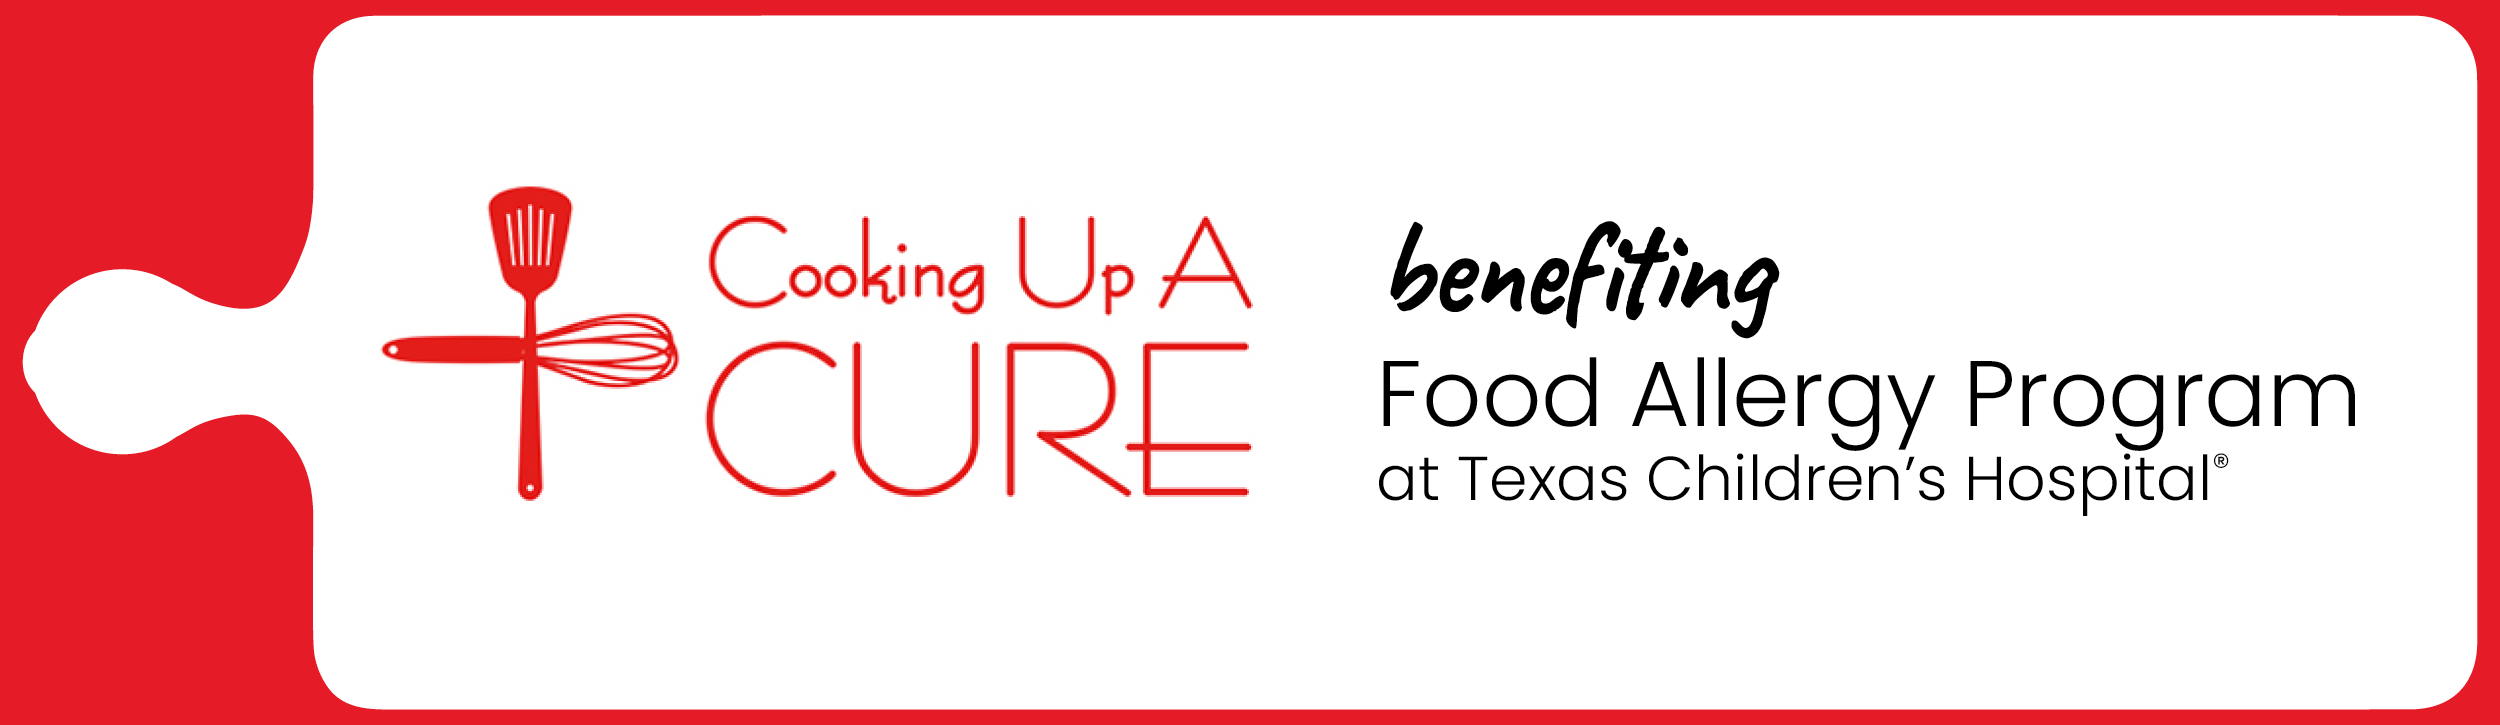 Cooking Up A CURE | Benefiting Texas Children's Hospital Food Allergy Program